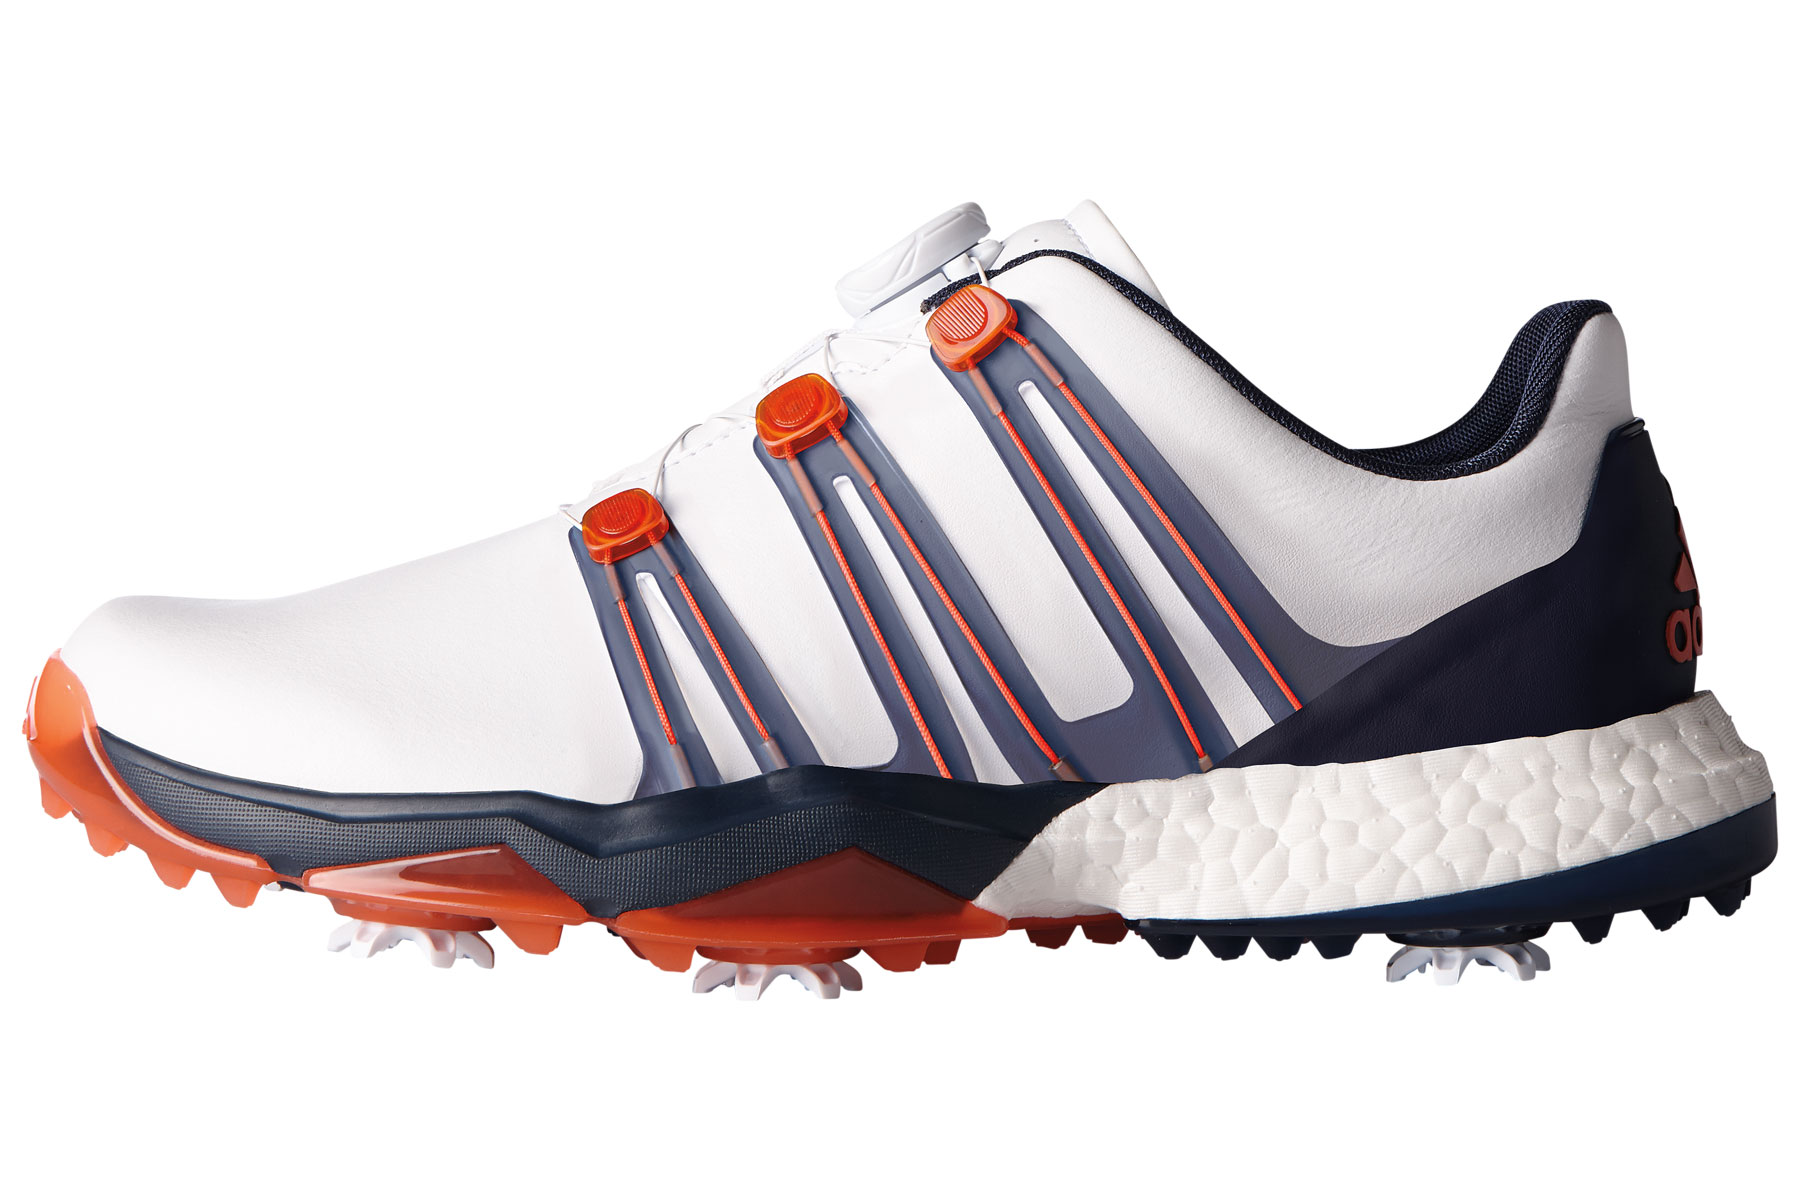 nmd golf shoes